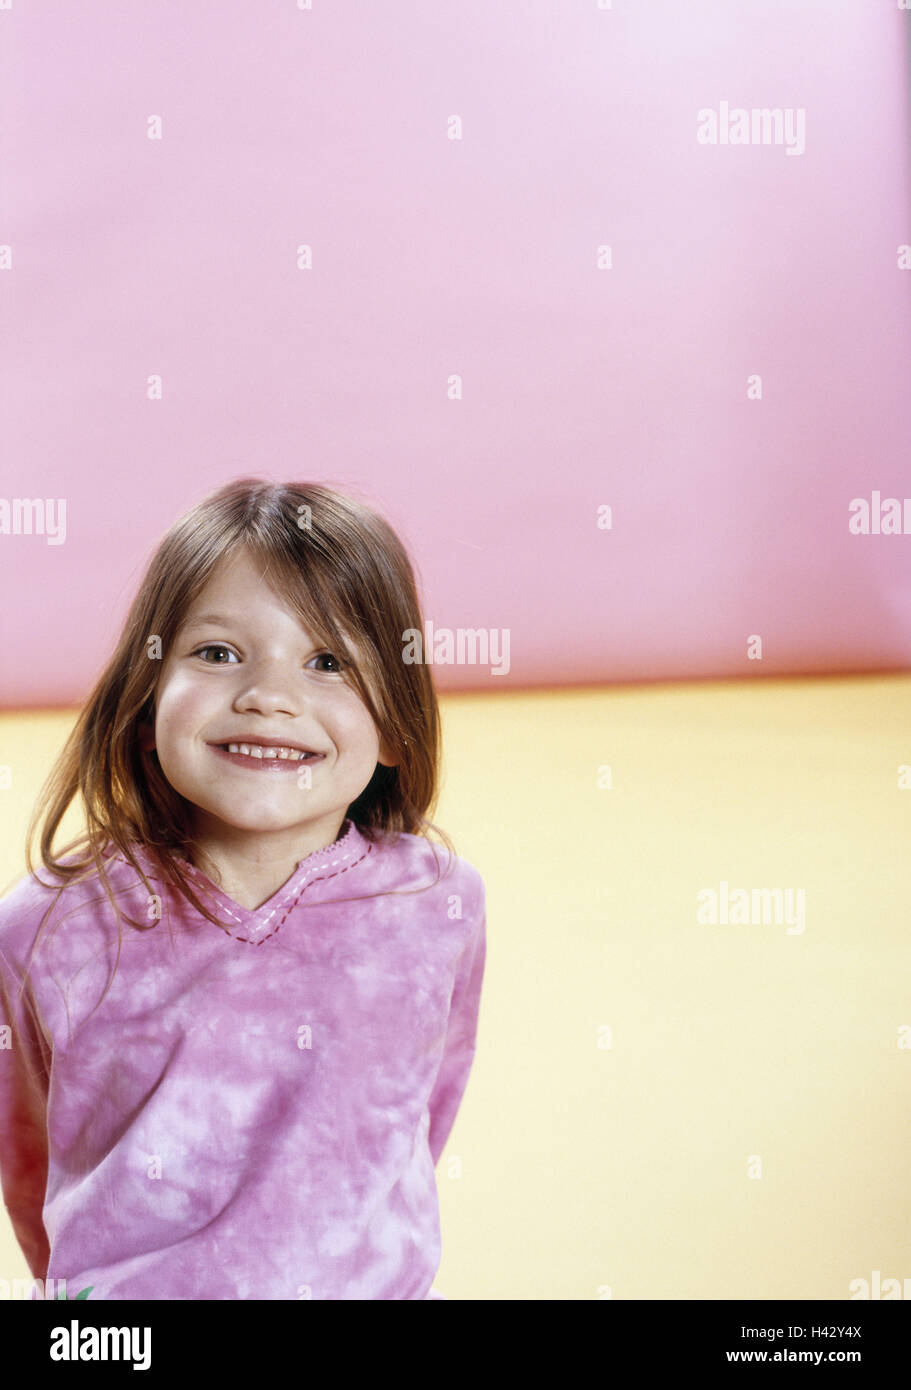 Girls, smiles, floor, sits,  Portrait  Child portrait, child, toddler, 4-6 years, long-haired, gaze camera, childhood, happily, expression, happiness, indoors, studio, background yellow-pink Stock Photo